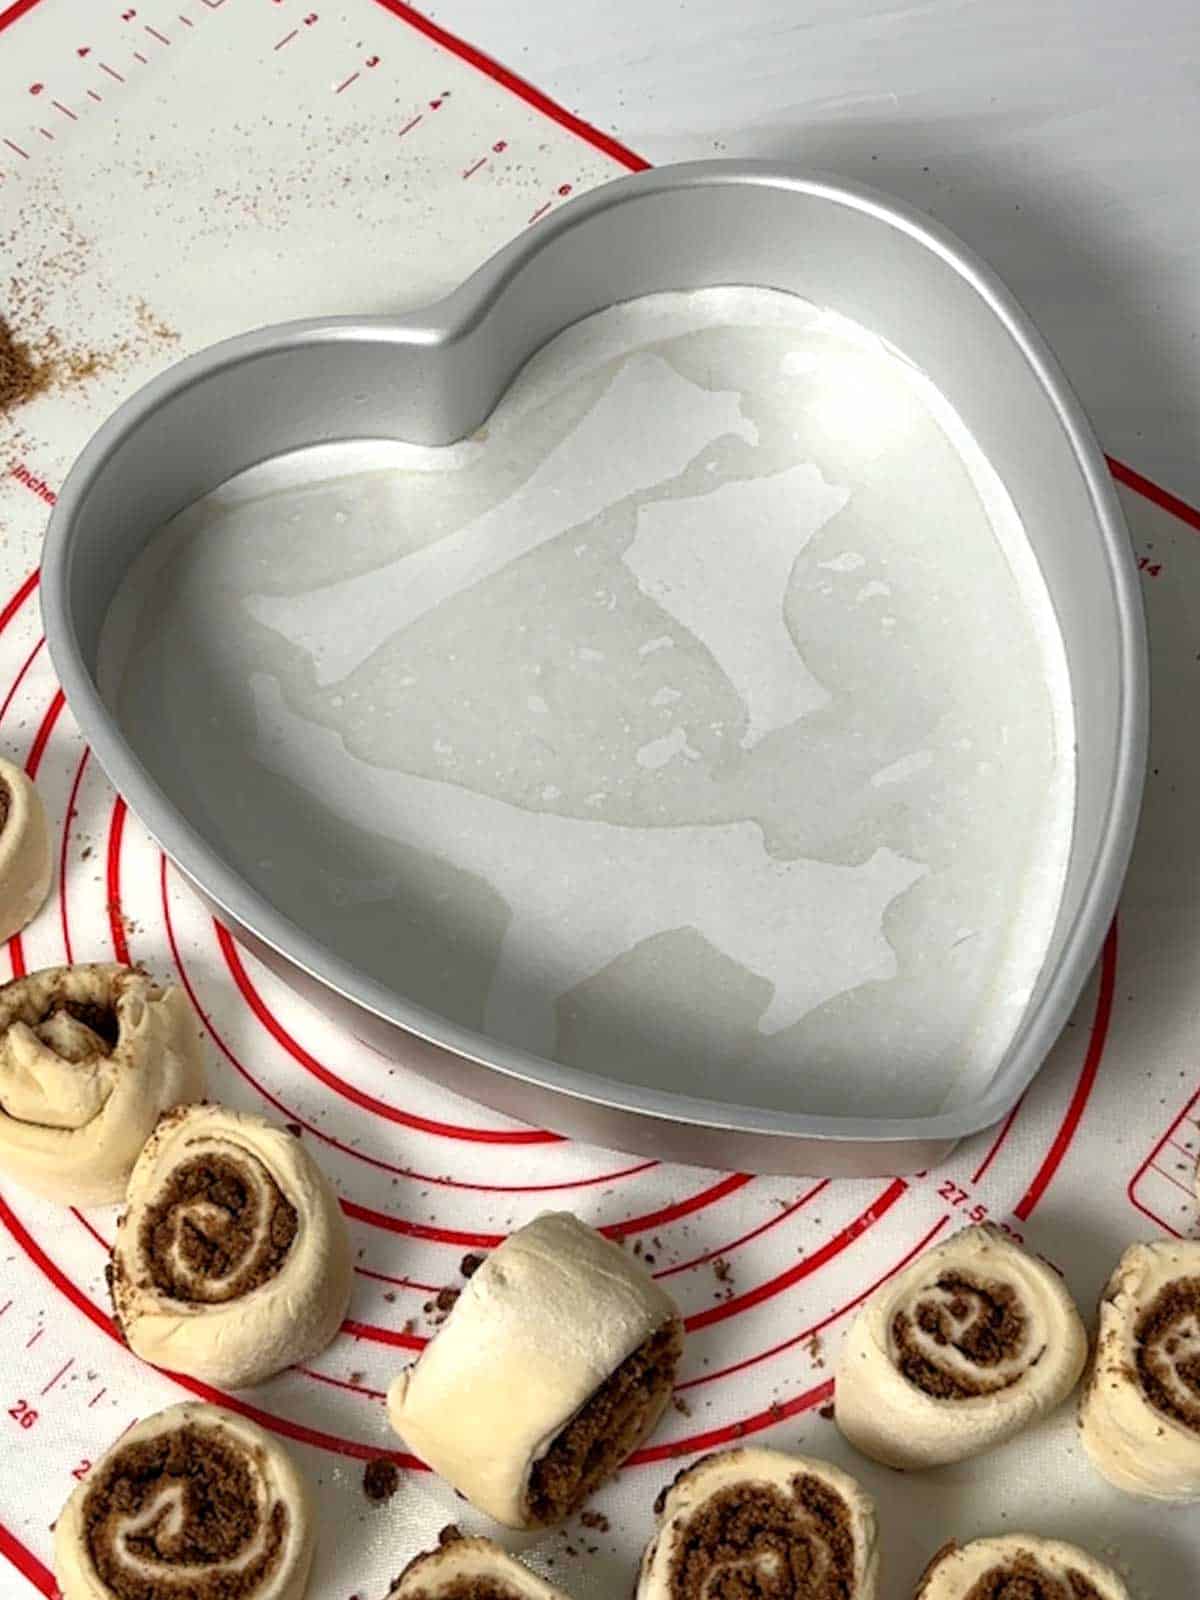 Heart-shaped pan lined with parchment paper.